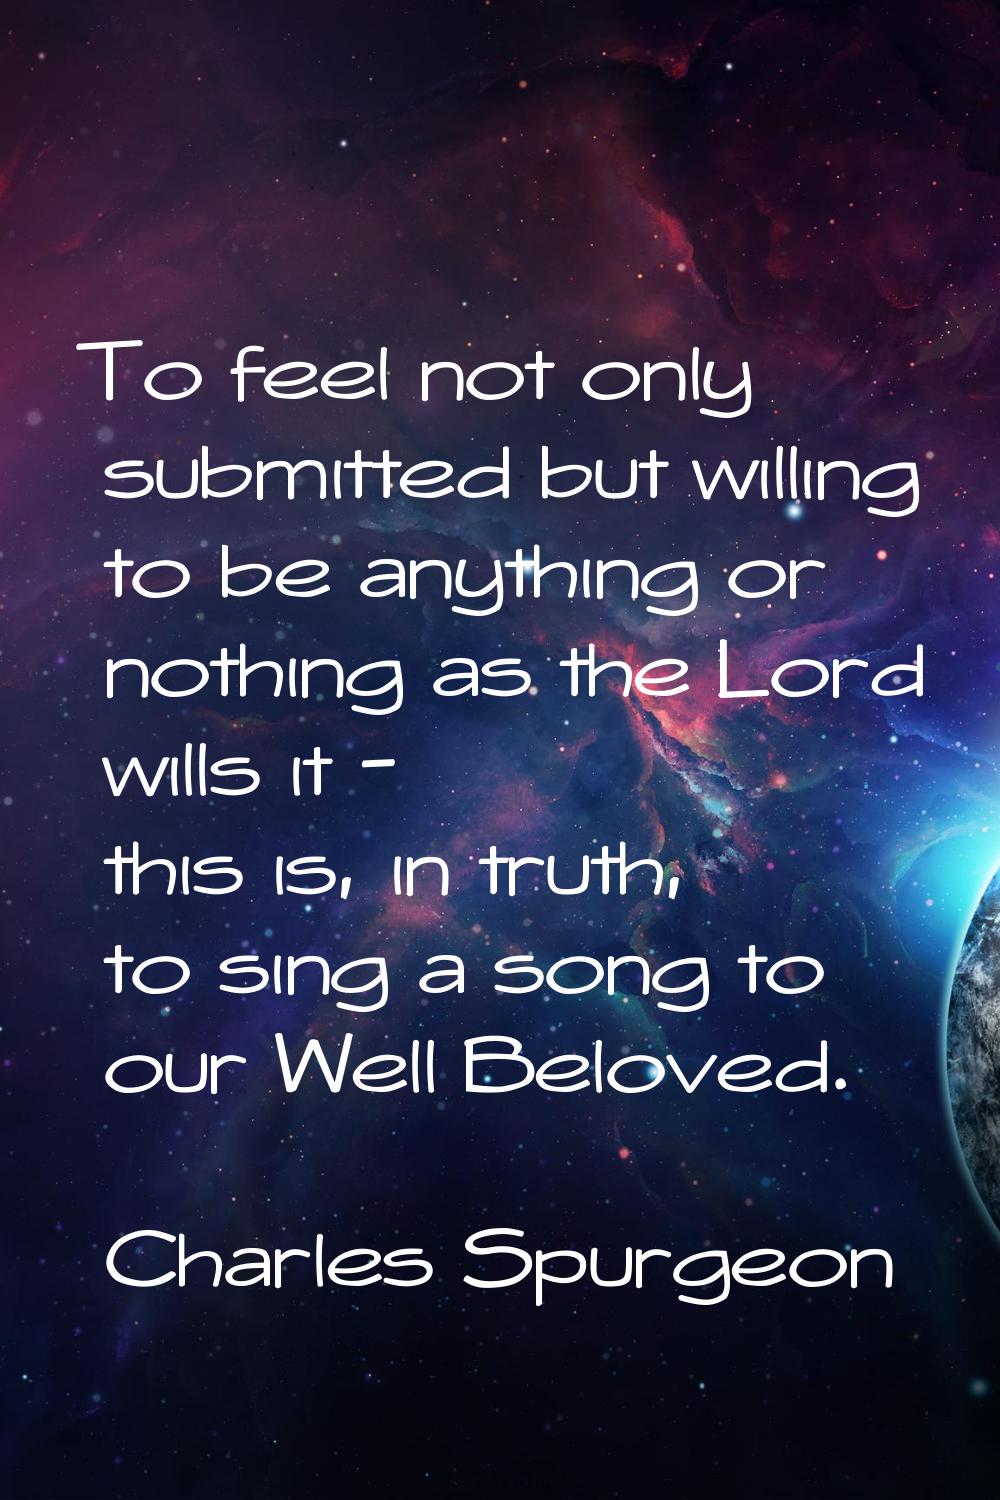 To feel not only submitted but willing to be anything or nothing as the Lord wills it - this is, in